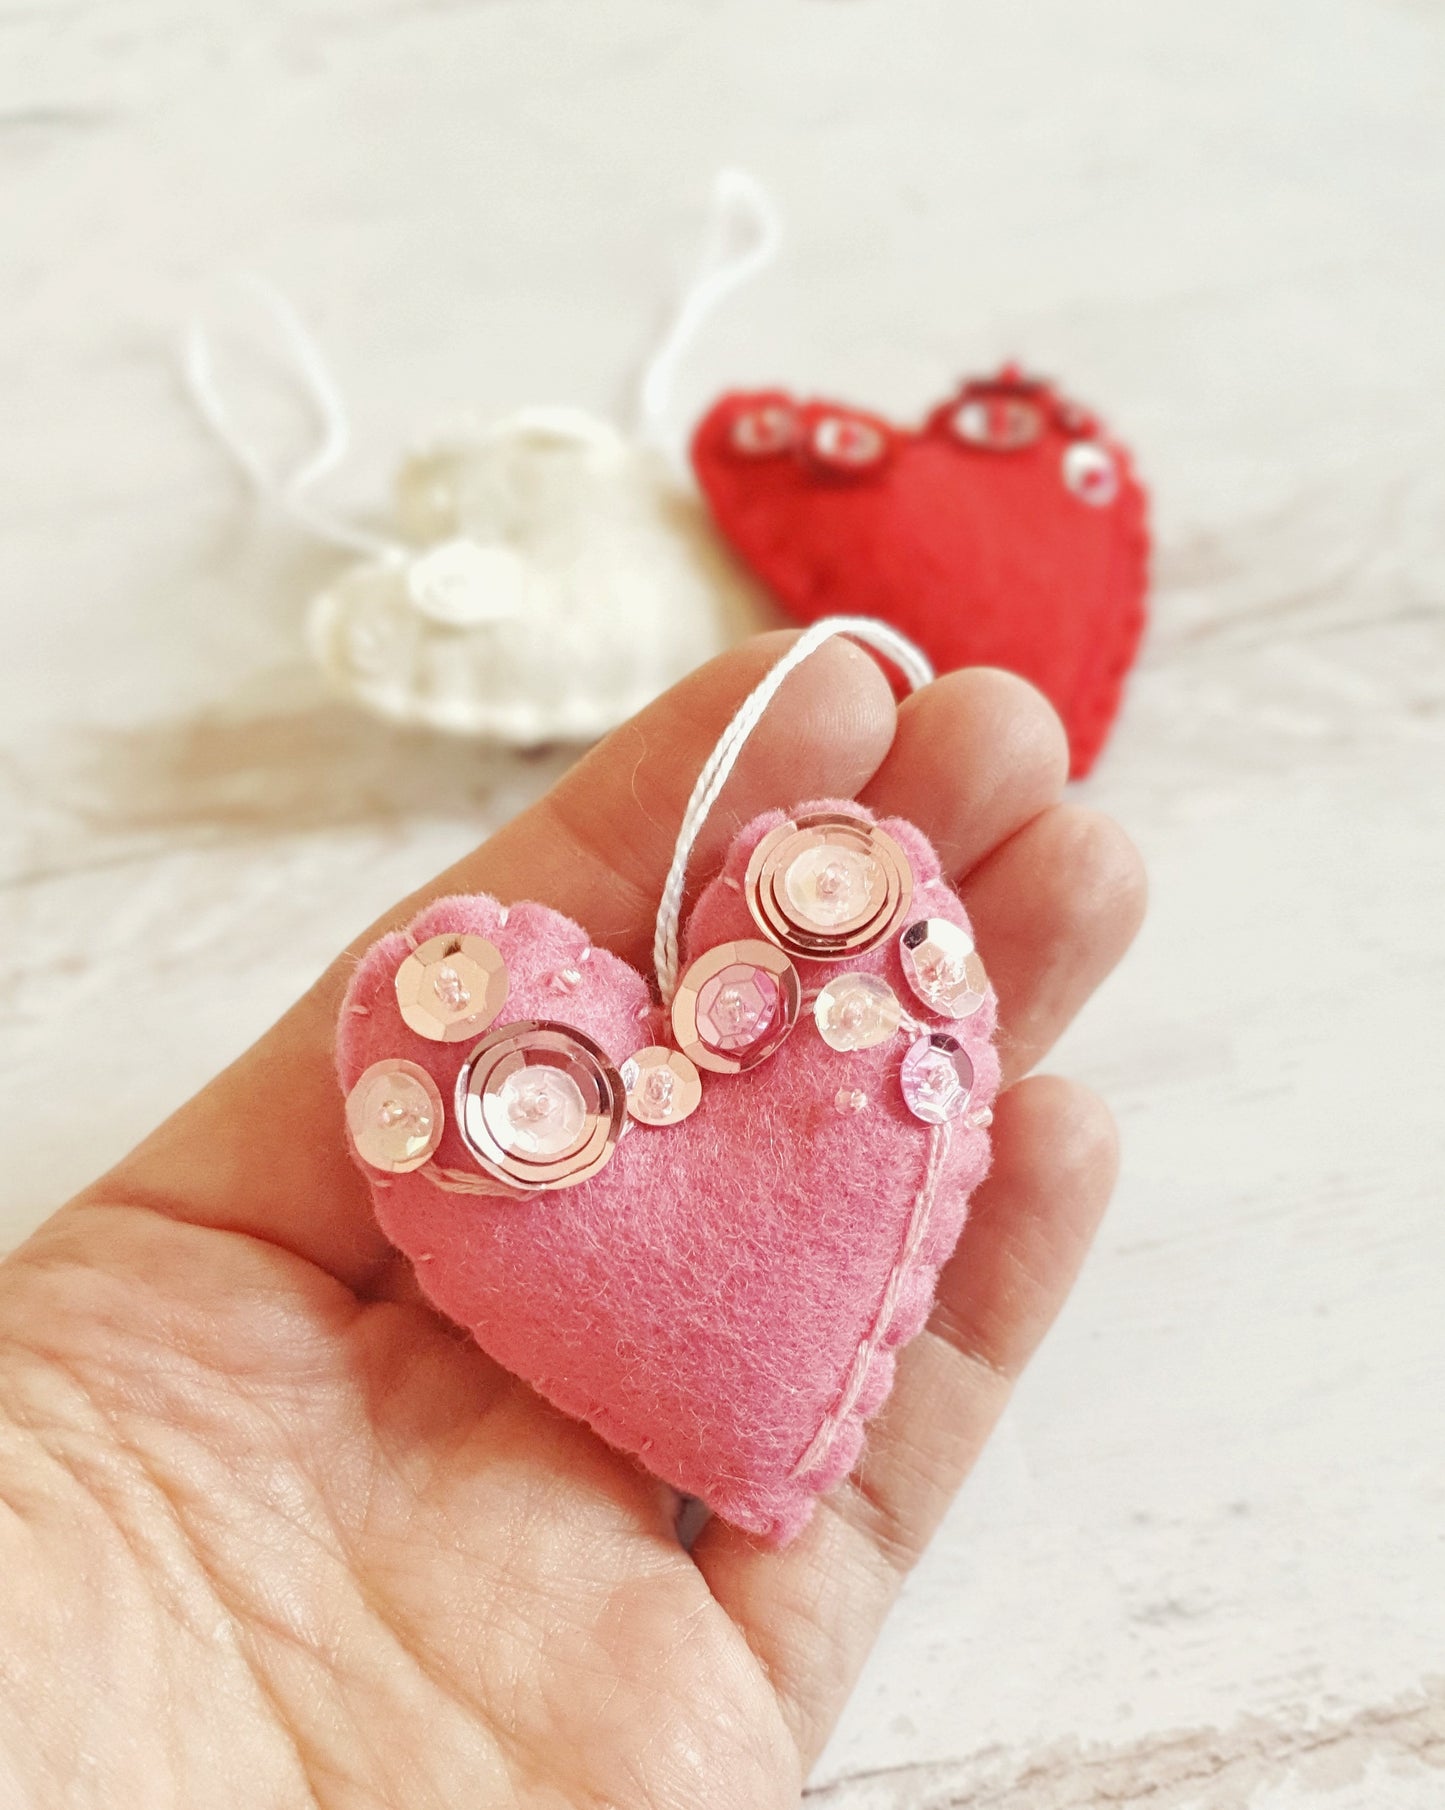 Heart ornament - felt ornaments with sequins - Valentine's day decoration